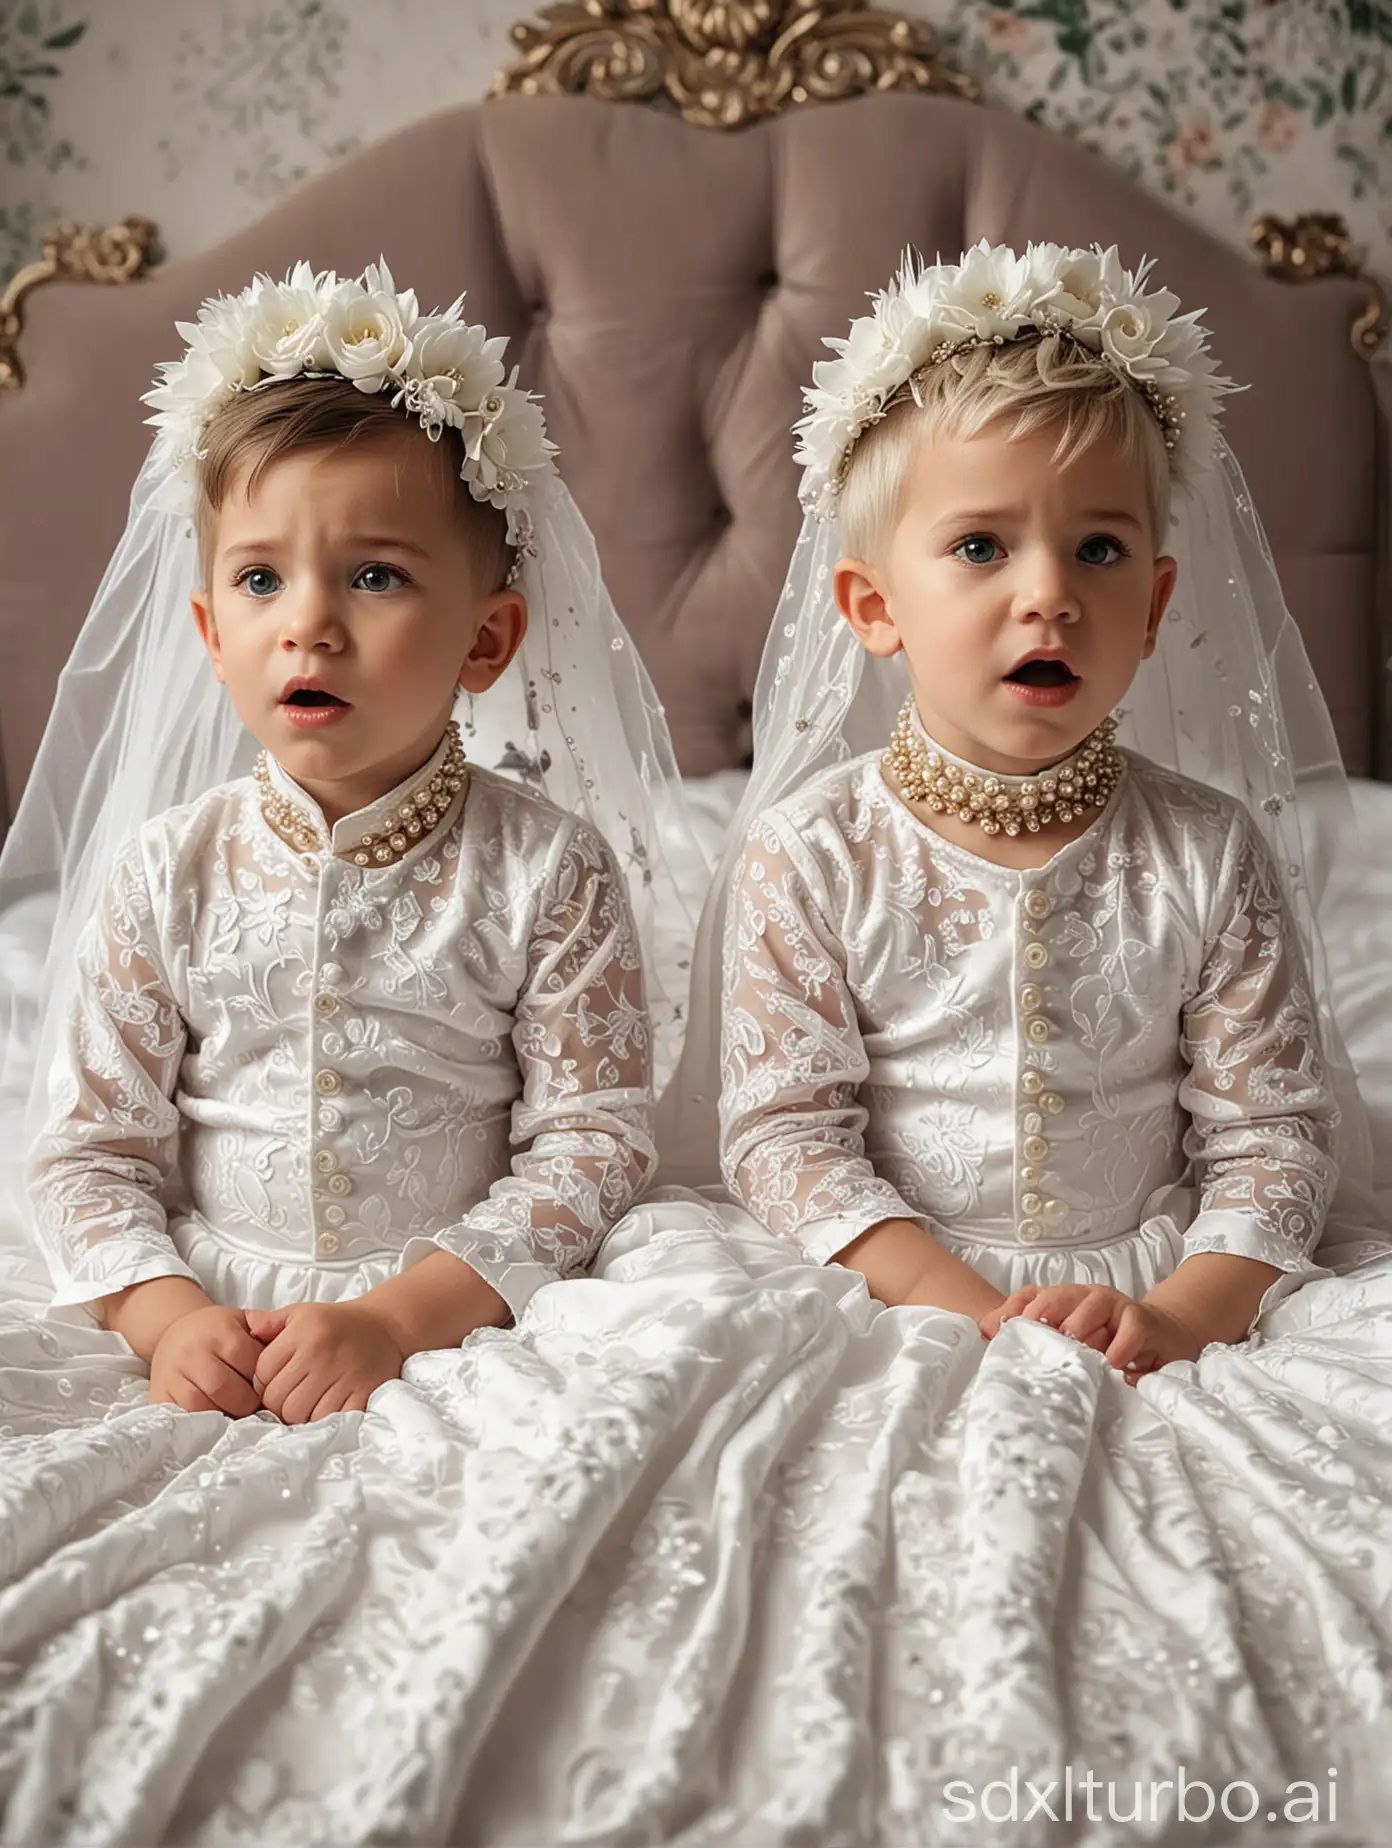 ((Gender role reversal)), 2 cute little boys are waking up in bed, they are tired and confused to find themselves wearing extravagant wedding dresses with flowery textures and veils, choker necklaces with spikes on, short smart hair, they are looking down at their clothes, energetic